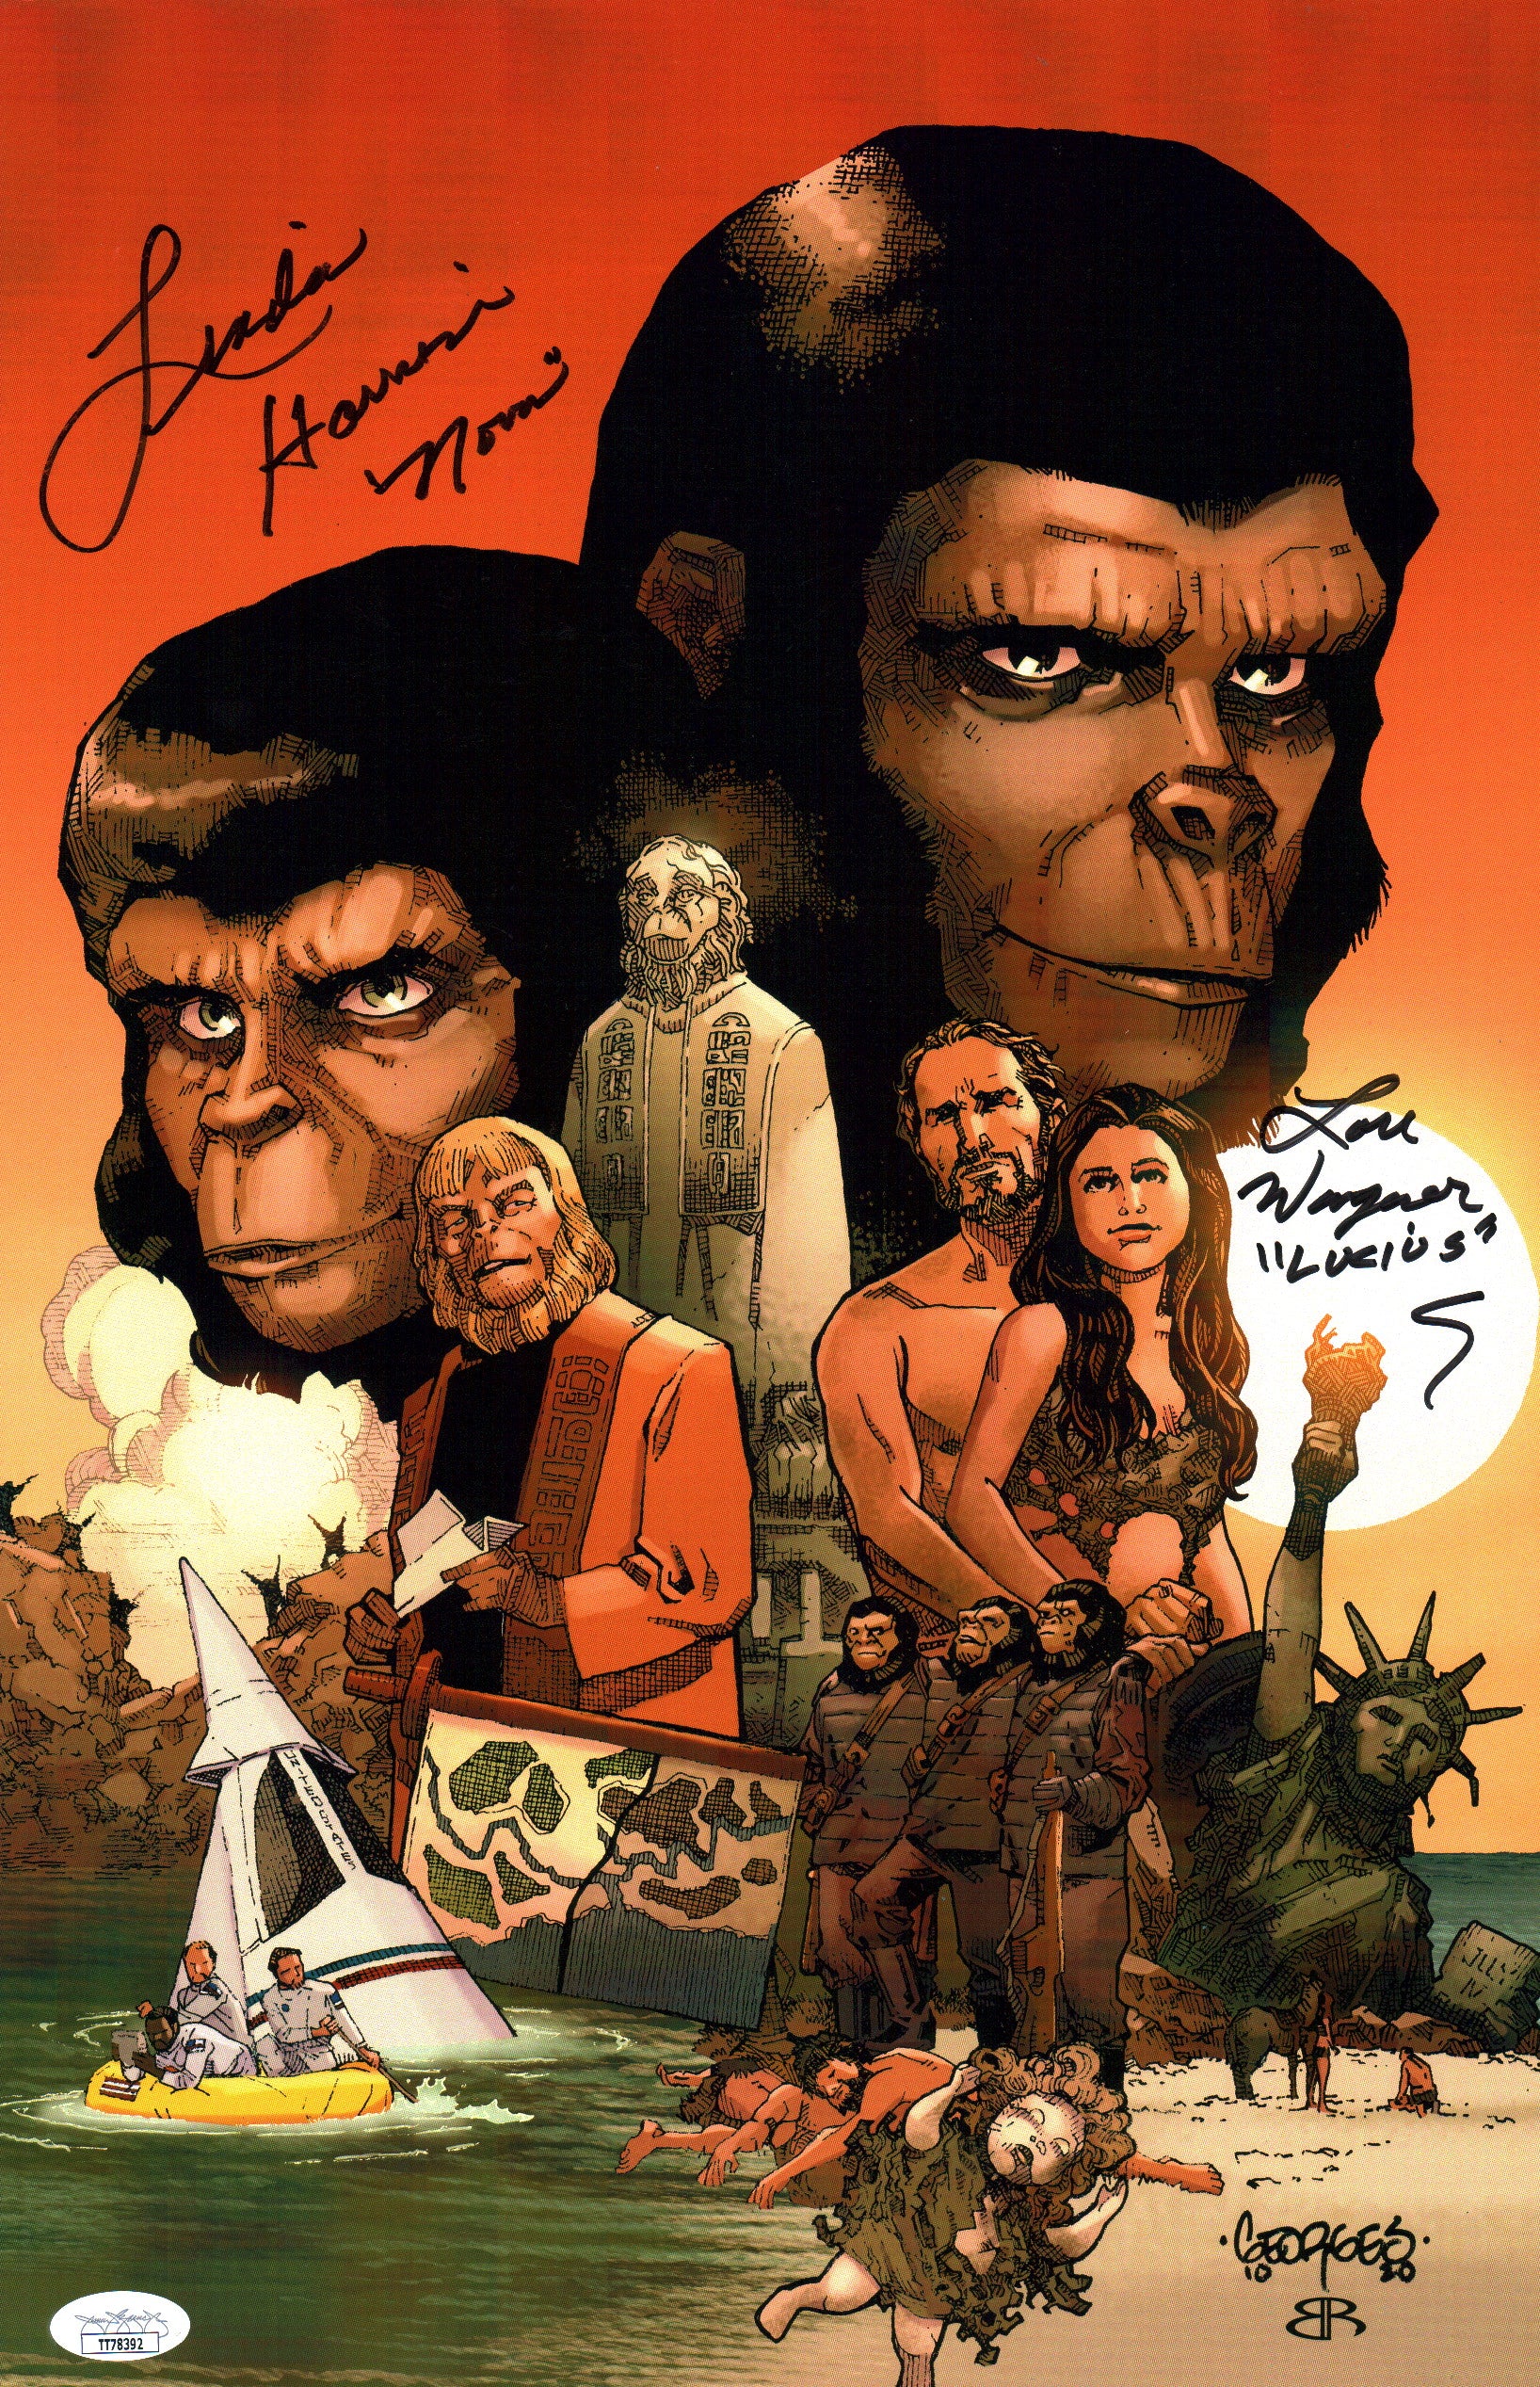 Planet of the Apes 11x17 Signed Photo Poster Harrison Wagner JSA COA Certified Autograph